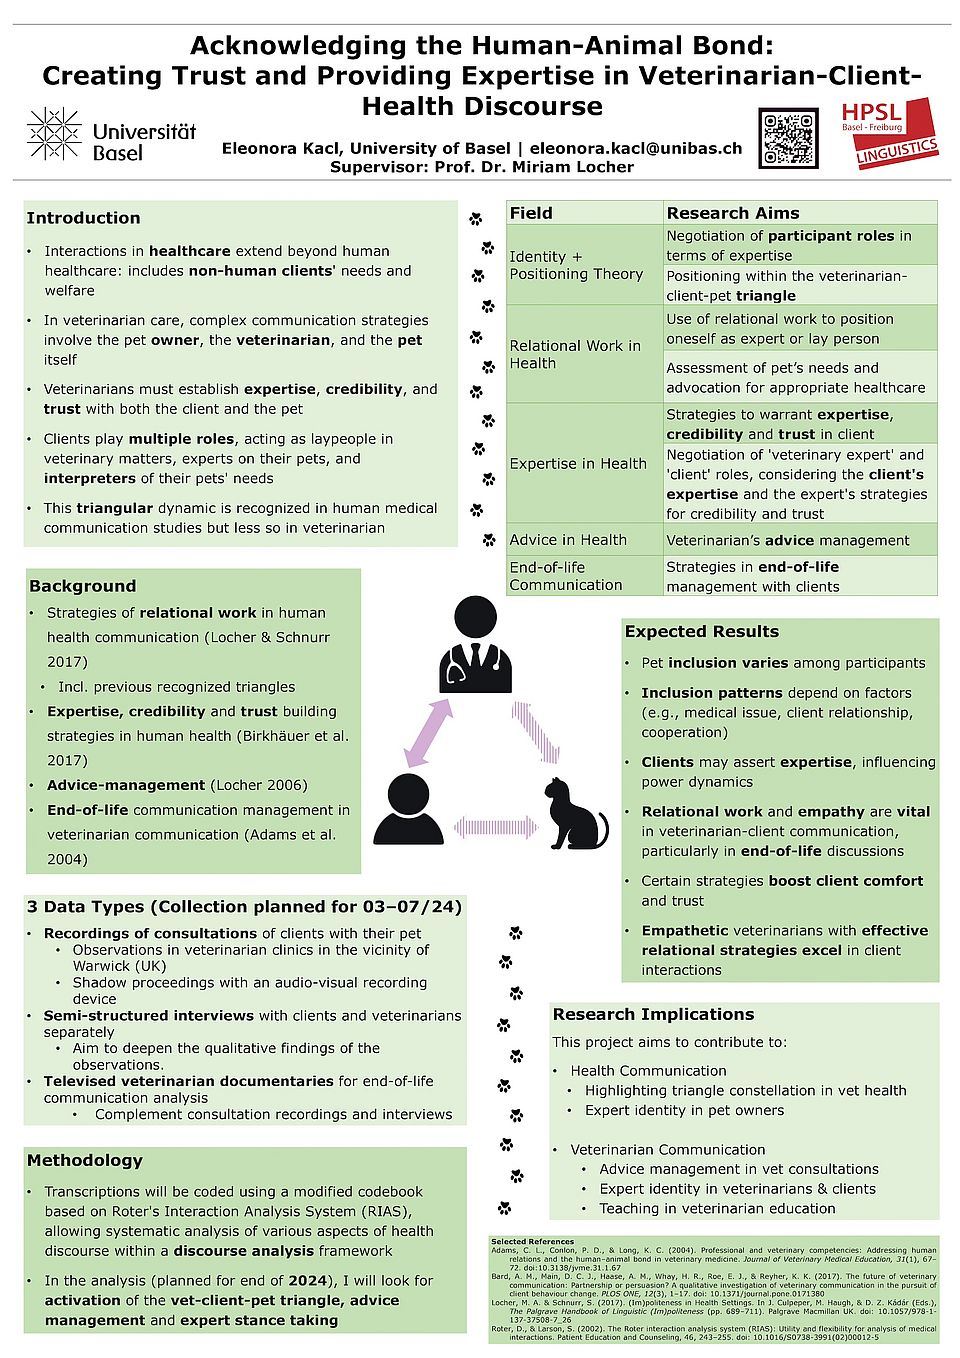 This image shows an overview of the project in the form of a presentation poster. The project is briefly introduced, the data and possible methodolgy are presented as well as the theory that will be used is commented on. All of these sections are presented in boxes that center around a triangle icon made up of a doctor, a client, and a cat.